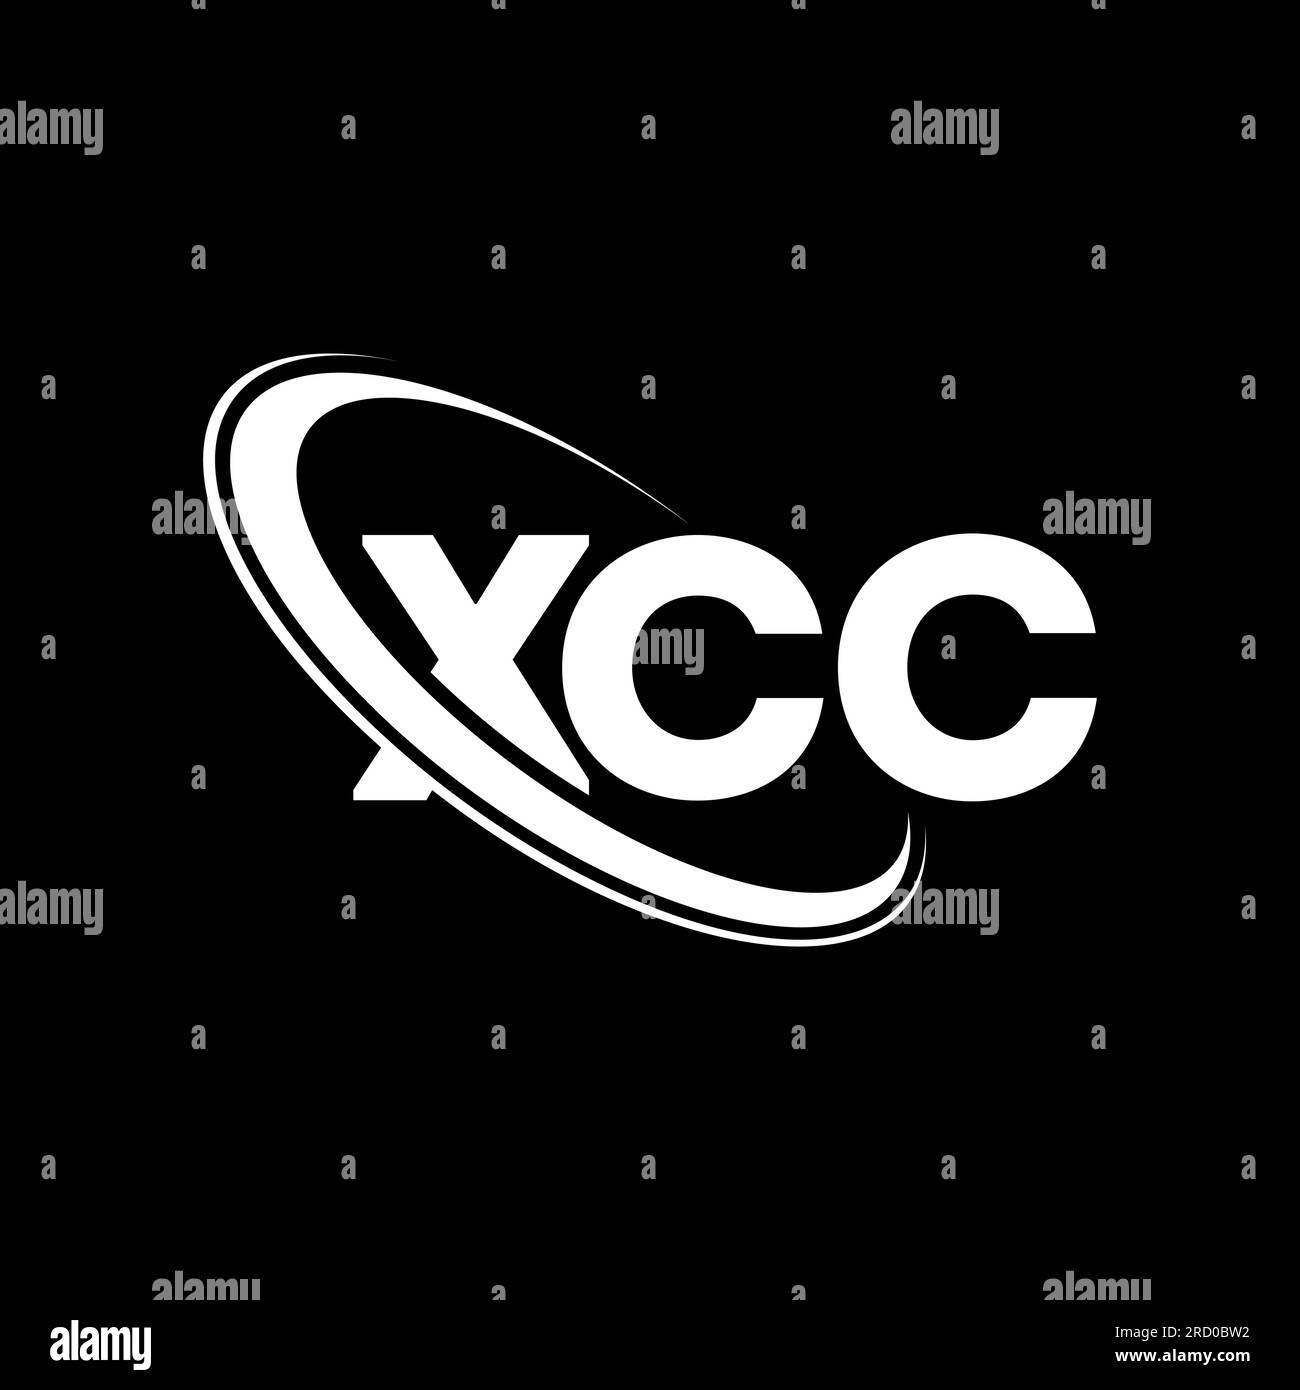 XCC logo. XCC letter. XCC letter logo design. Initials XCC logo linked with circle and uppercase monogram logo. XCC typography for technology, busines Stock Vector